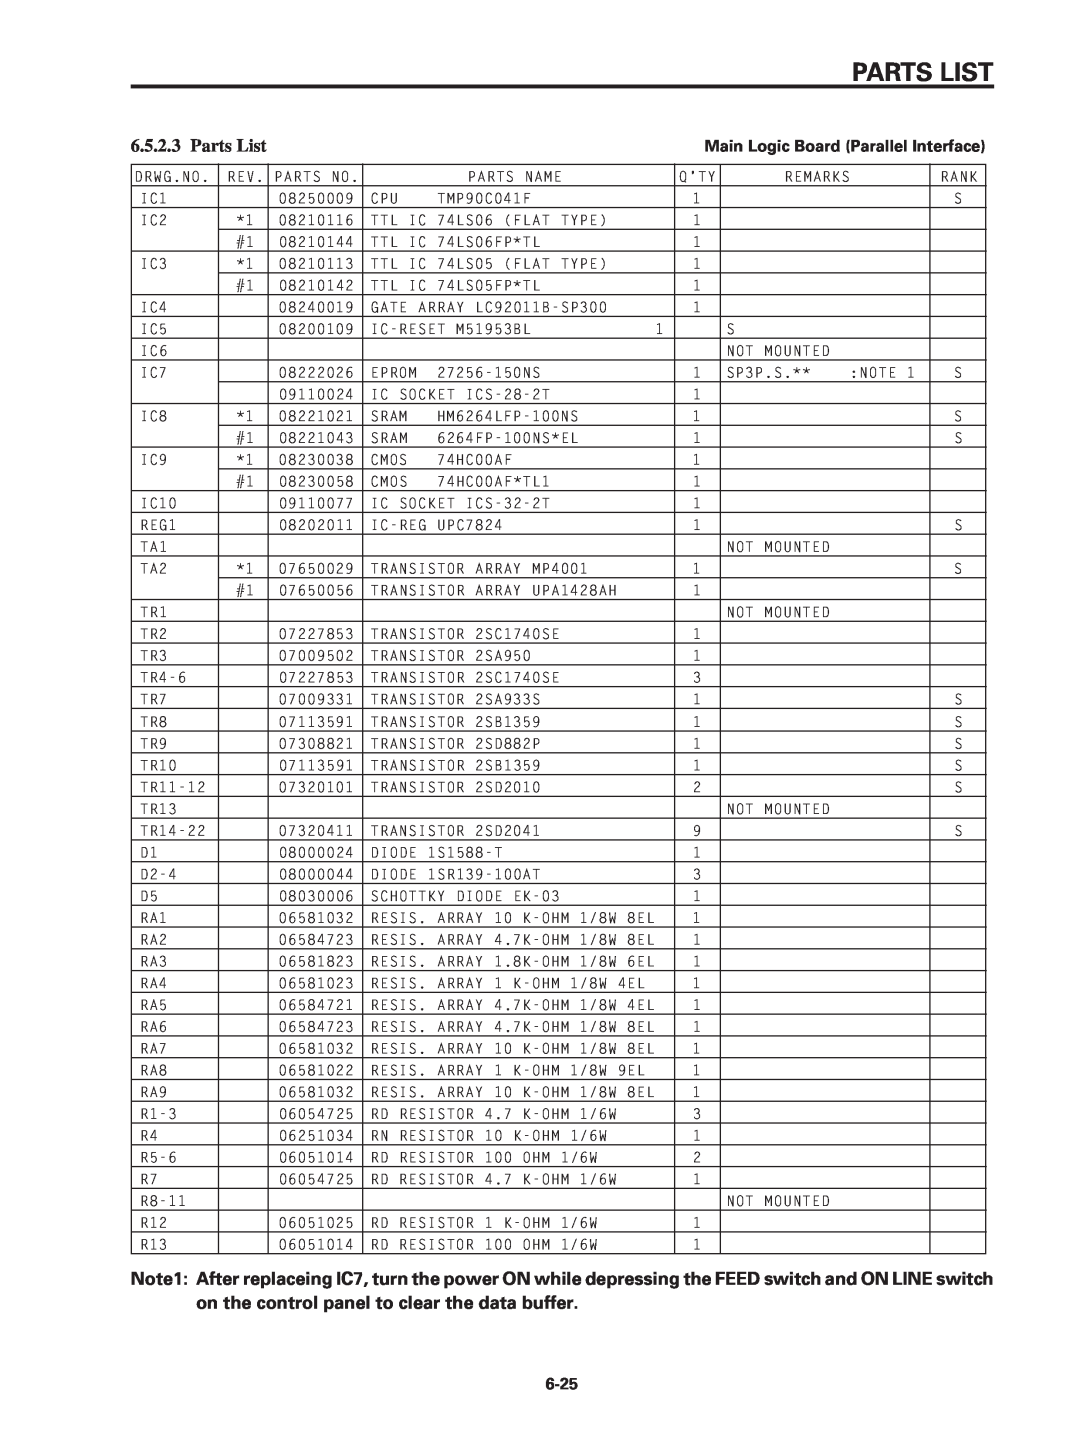 Star Micronics SP320S technical manual Parts List, Main Logic Board Parallel Interface, 6-25 